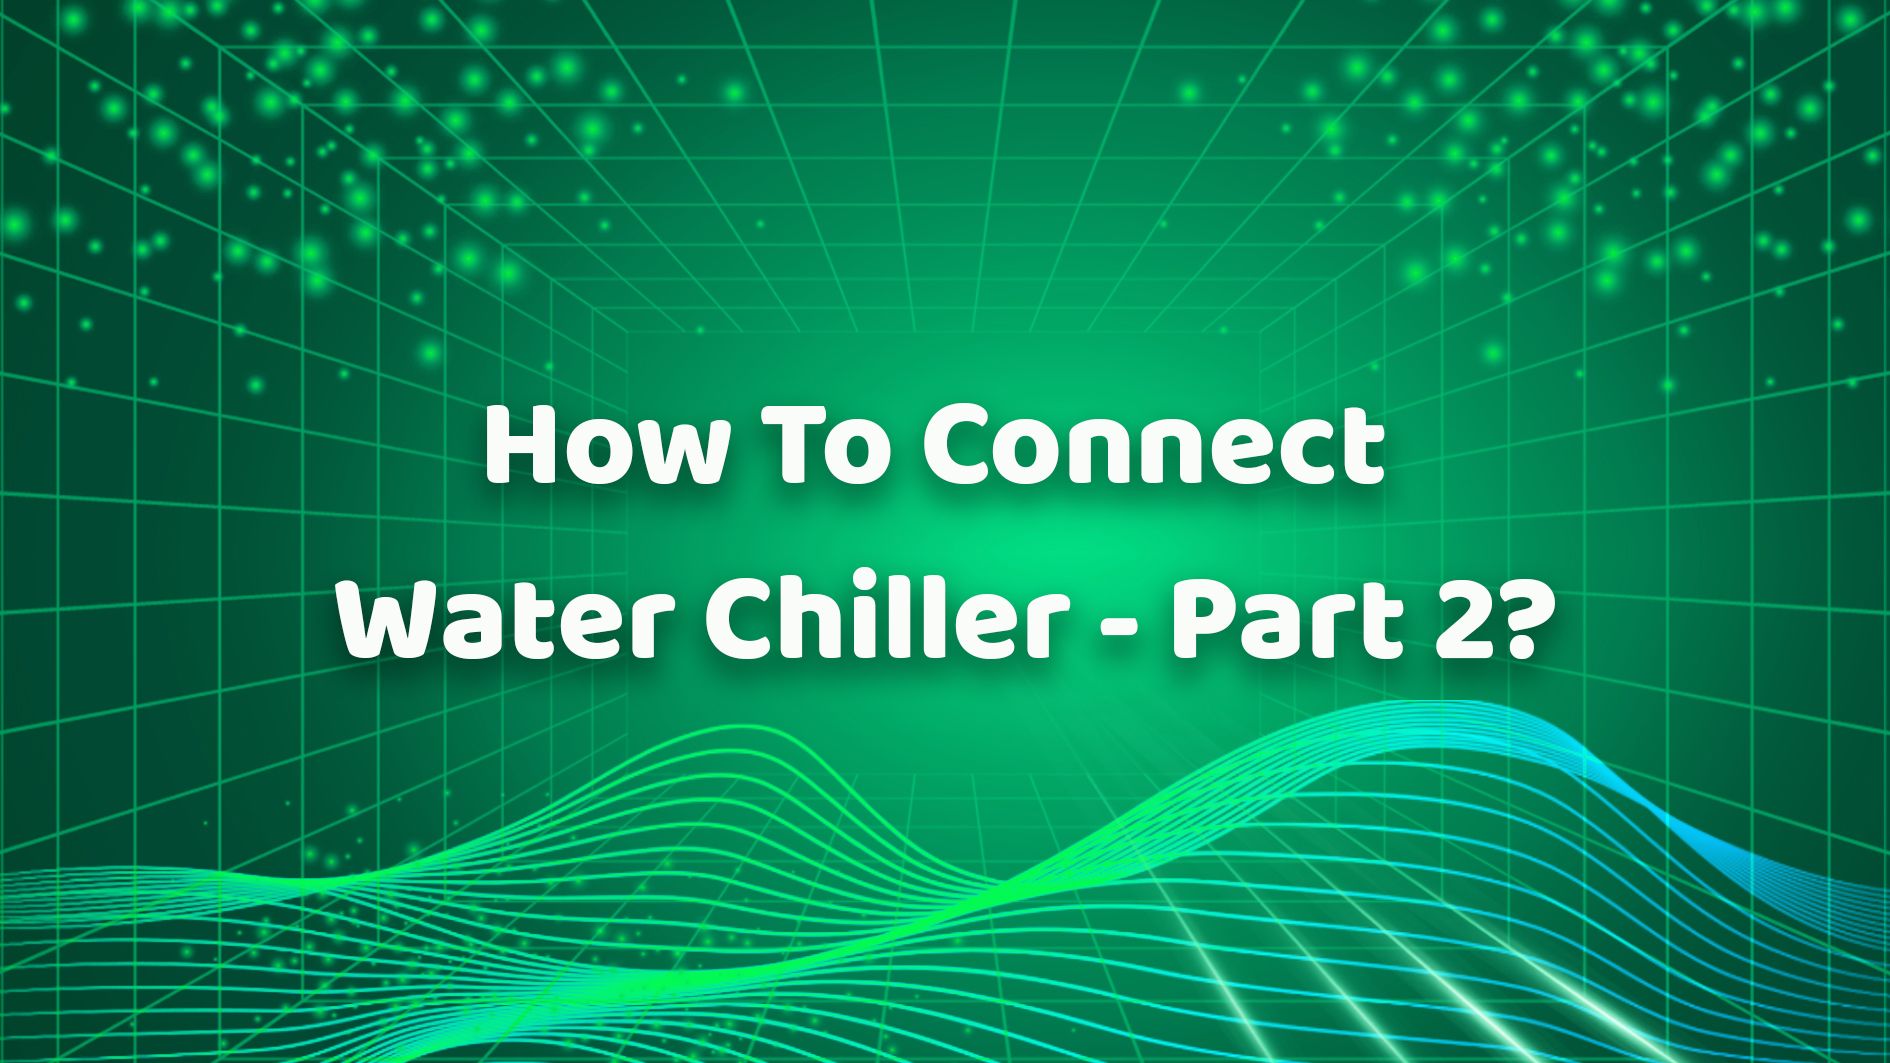 How To Connect Water Chiller - Part 2？